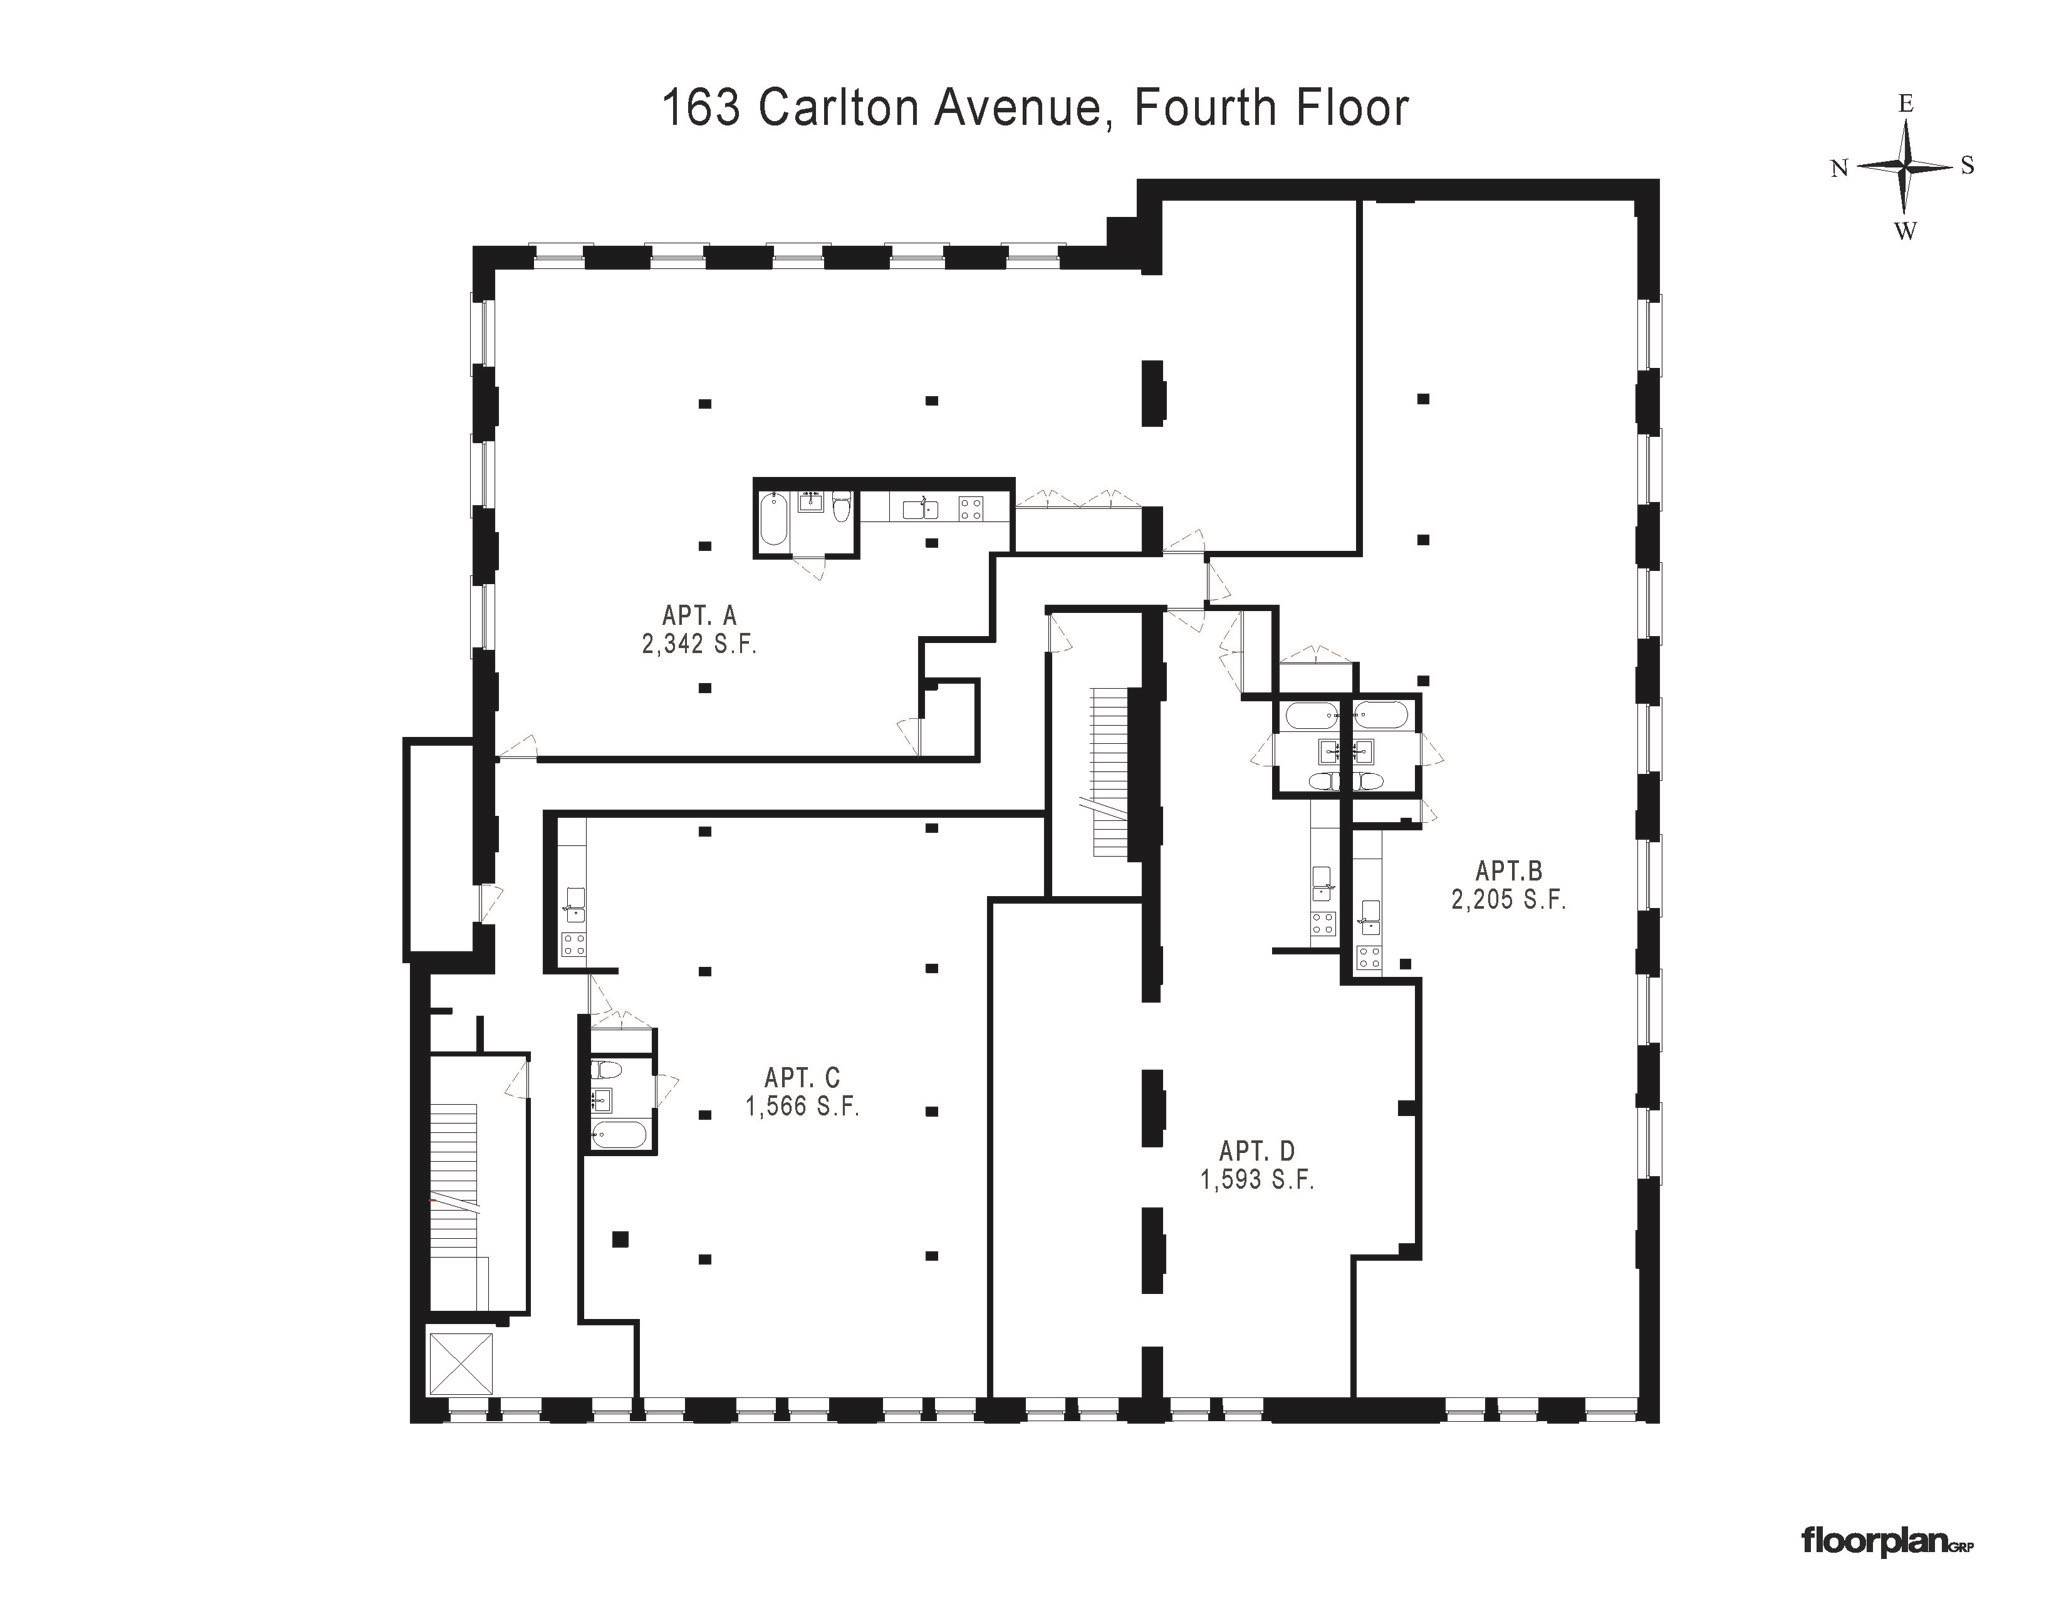 163 Carlton is a 4 story, 38, 000 sq ft residential loft building located in the heart of Fort Greene, Brooklyn, featuring 19 expansive lofts ranging between 1239 sqft 2934 ...